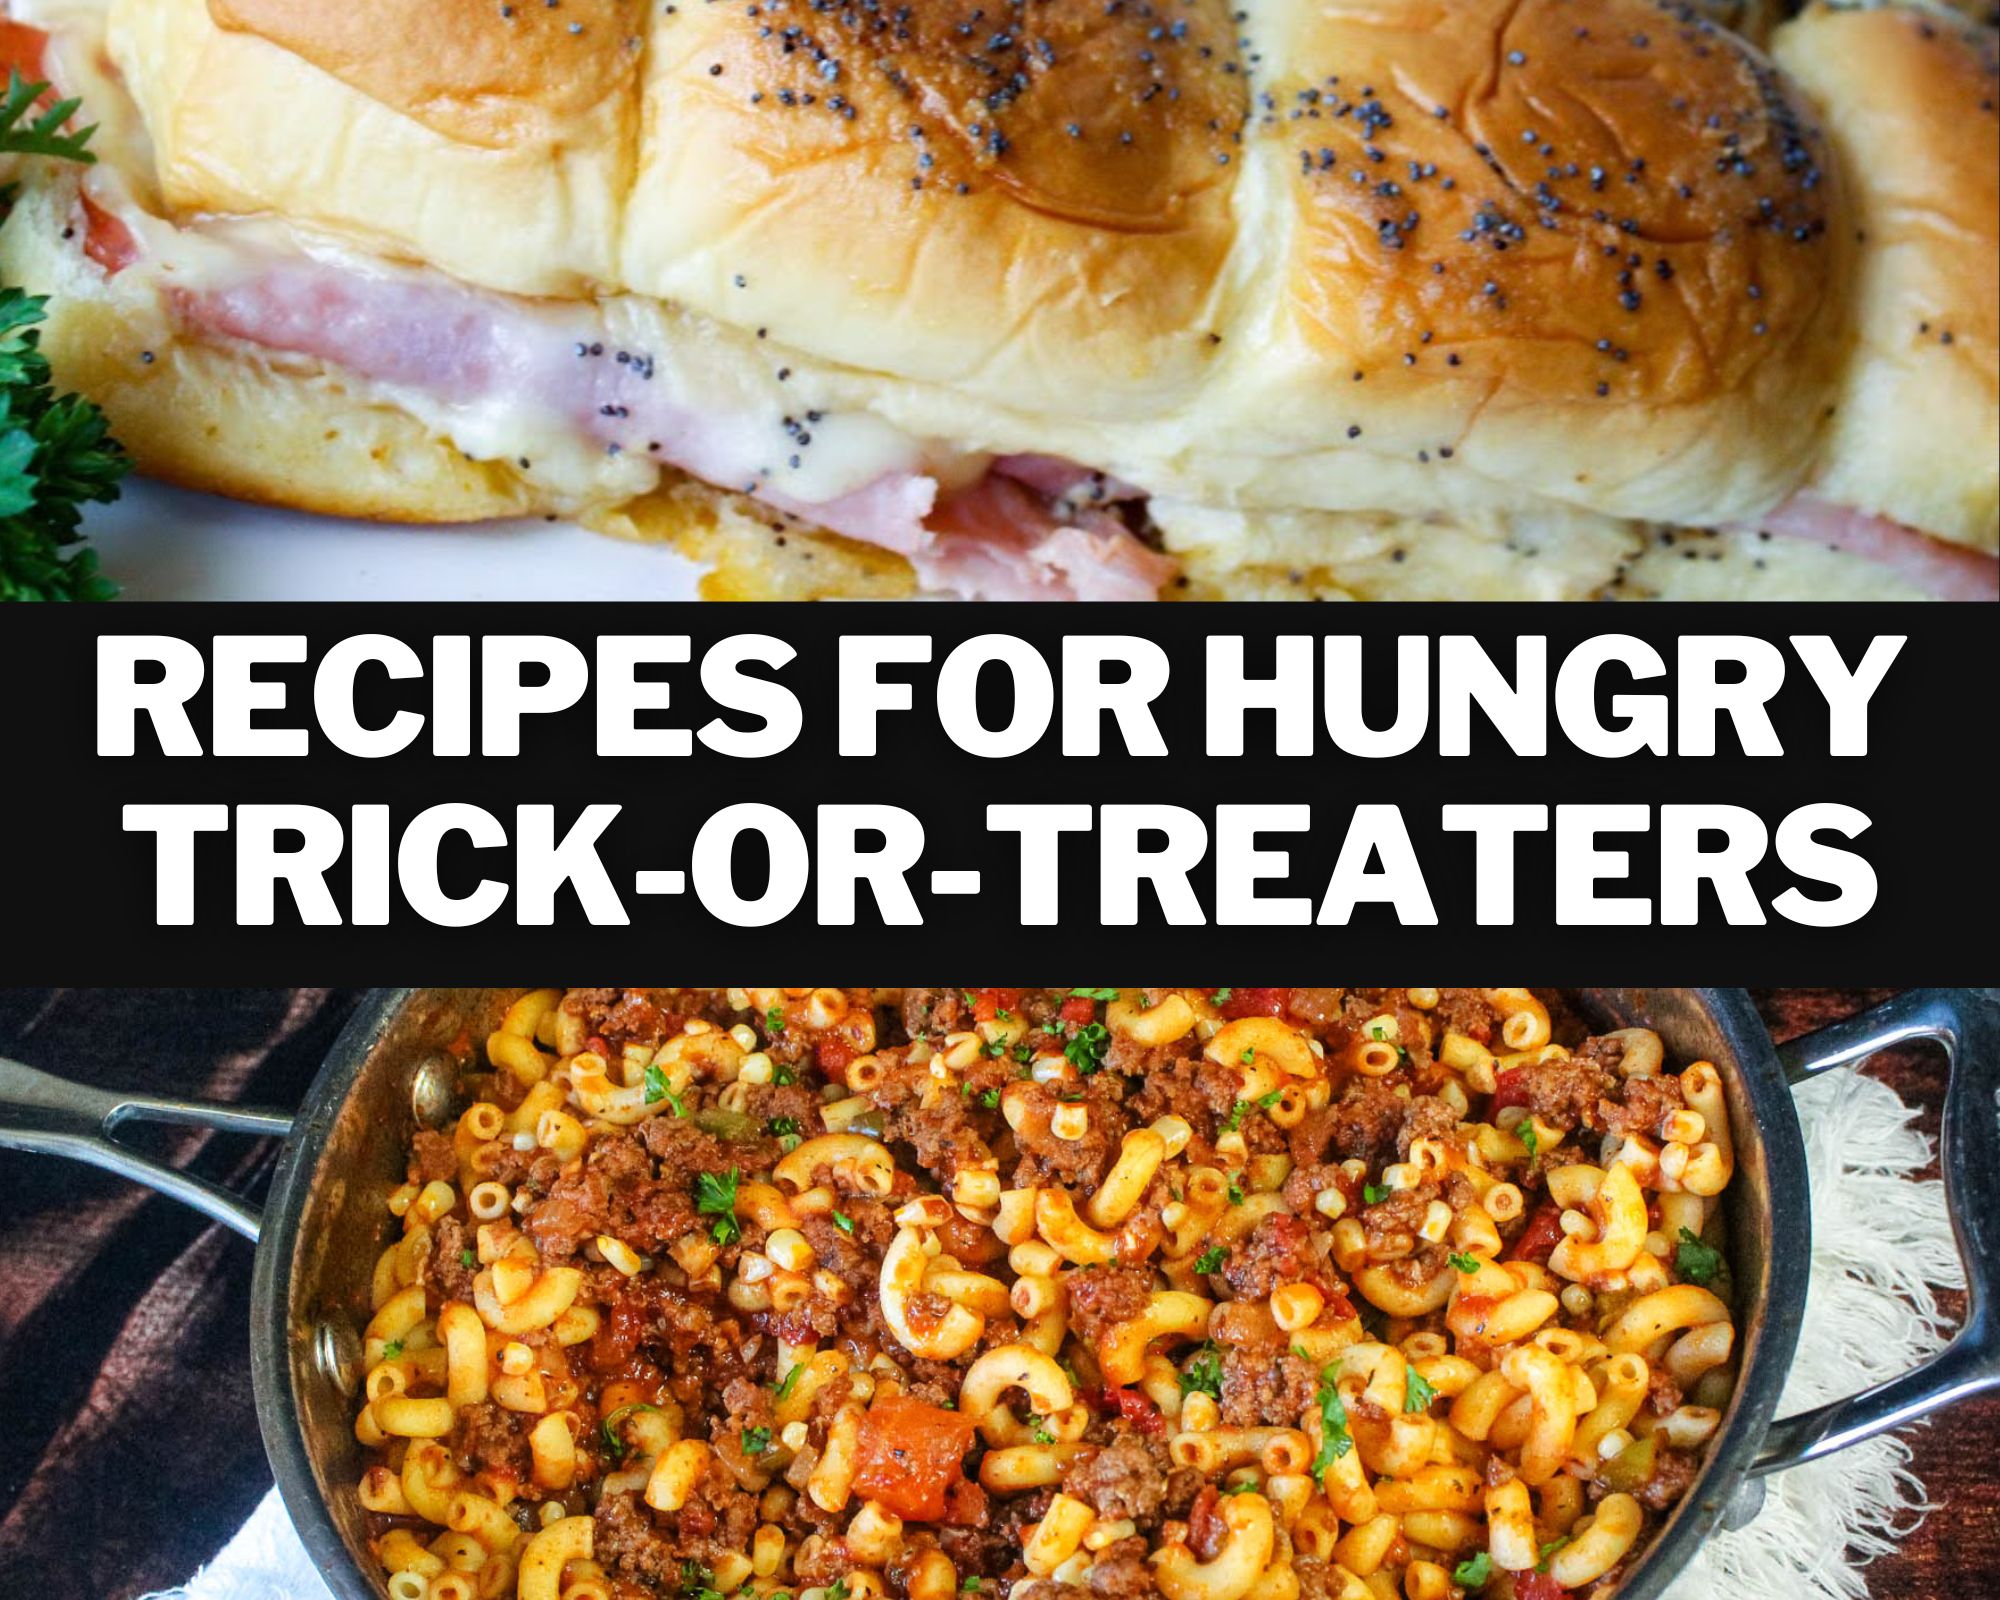 Recipes for Hungry Trick-Or-Treaters